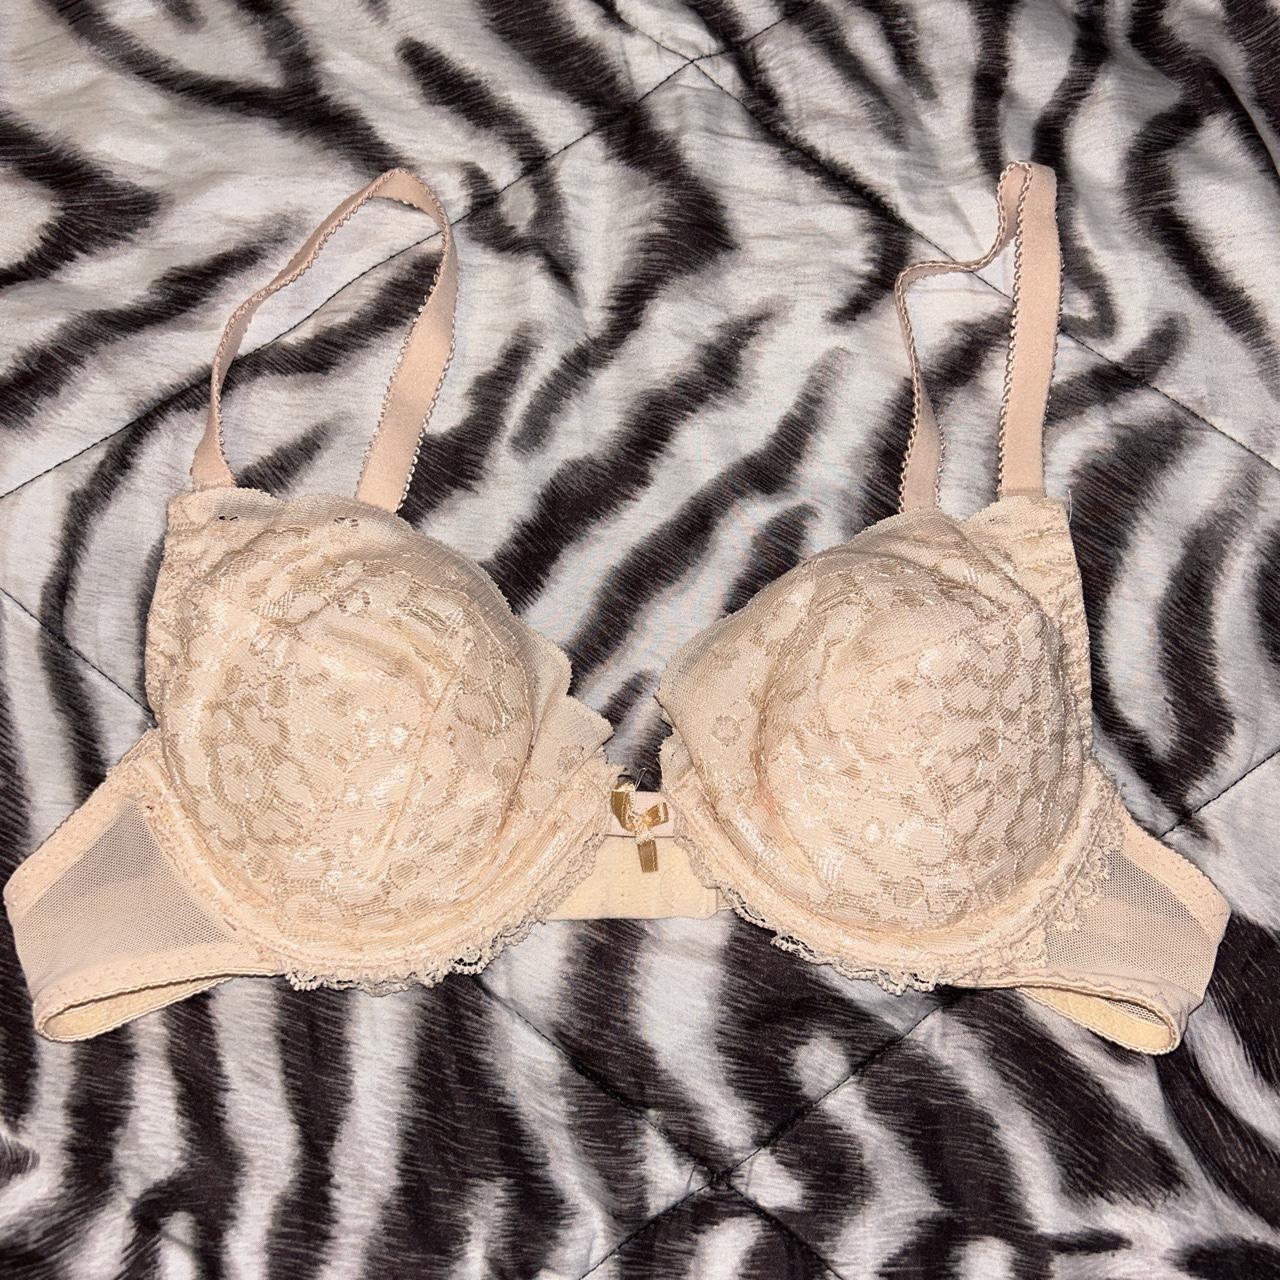 36A bra I think I bought this in Mexico. Brand - Depop